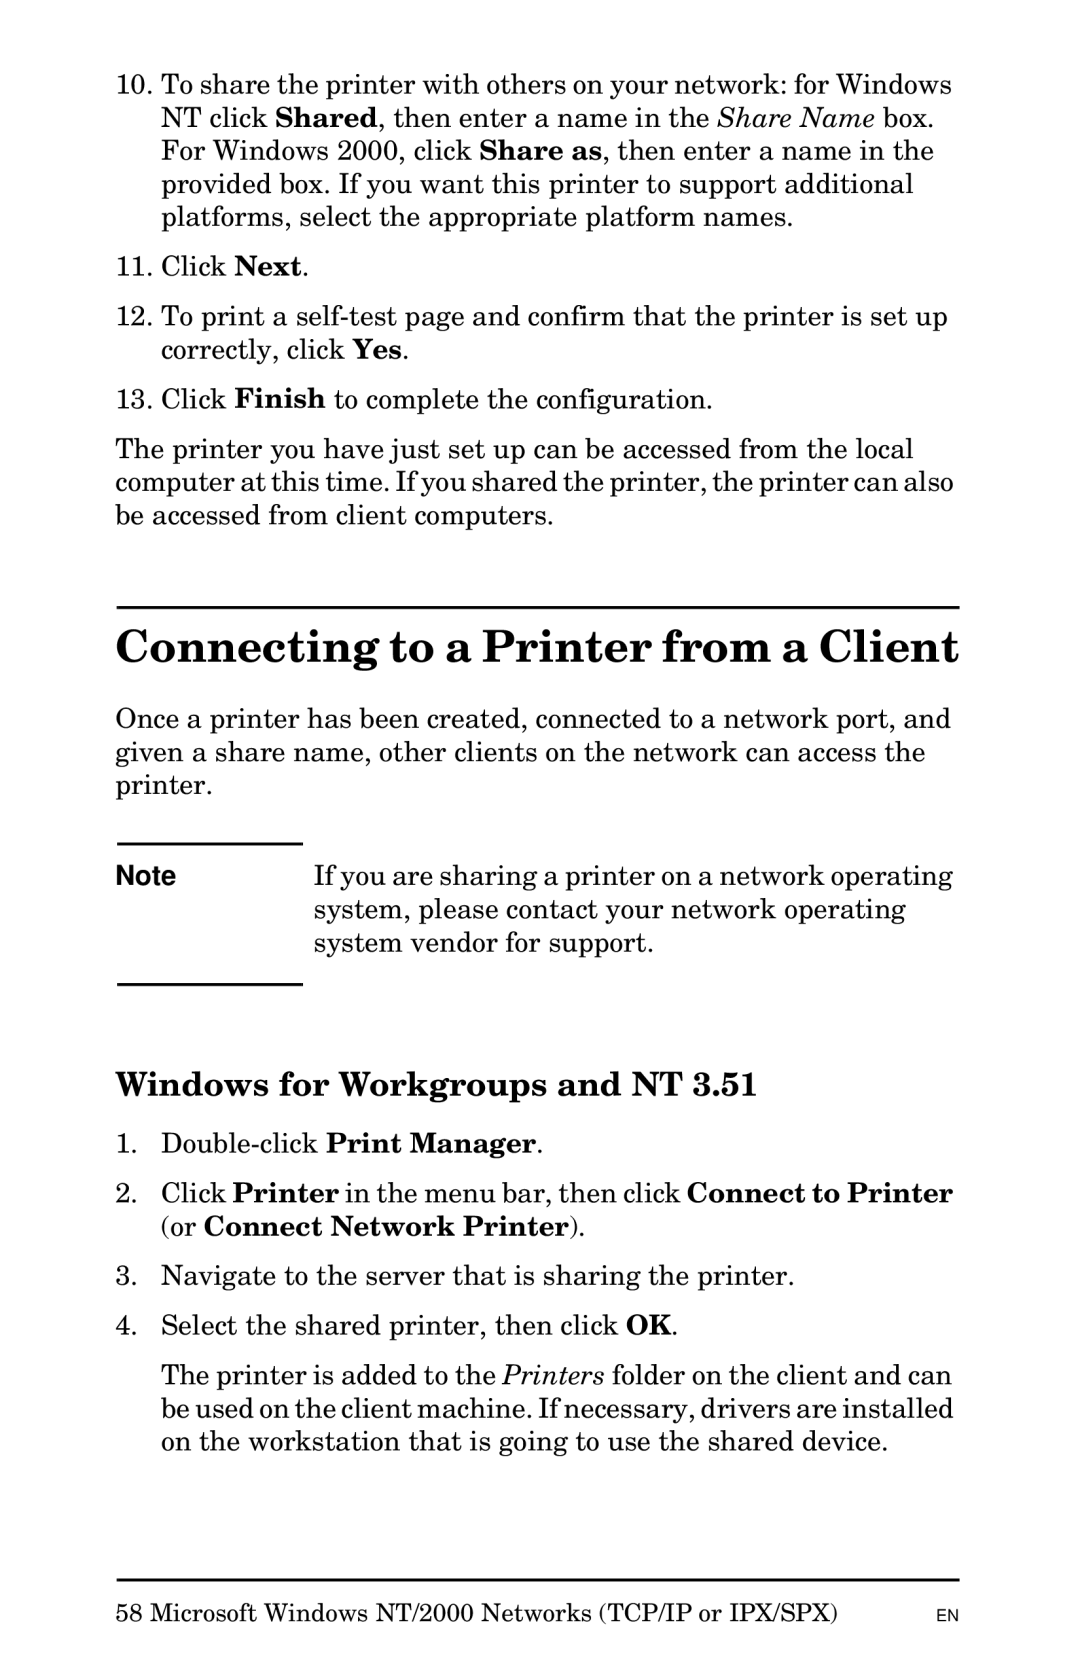 HP Jetadmin Software for OS/2 manual Connecting to a Printer from a Client, Windows for Workgroups and NT 